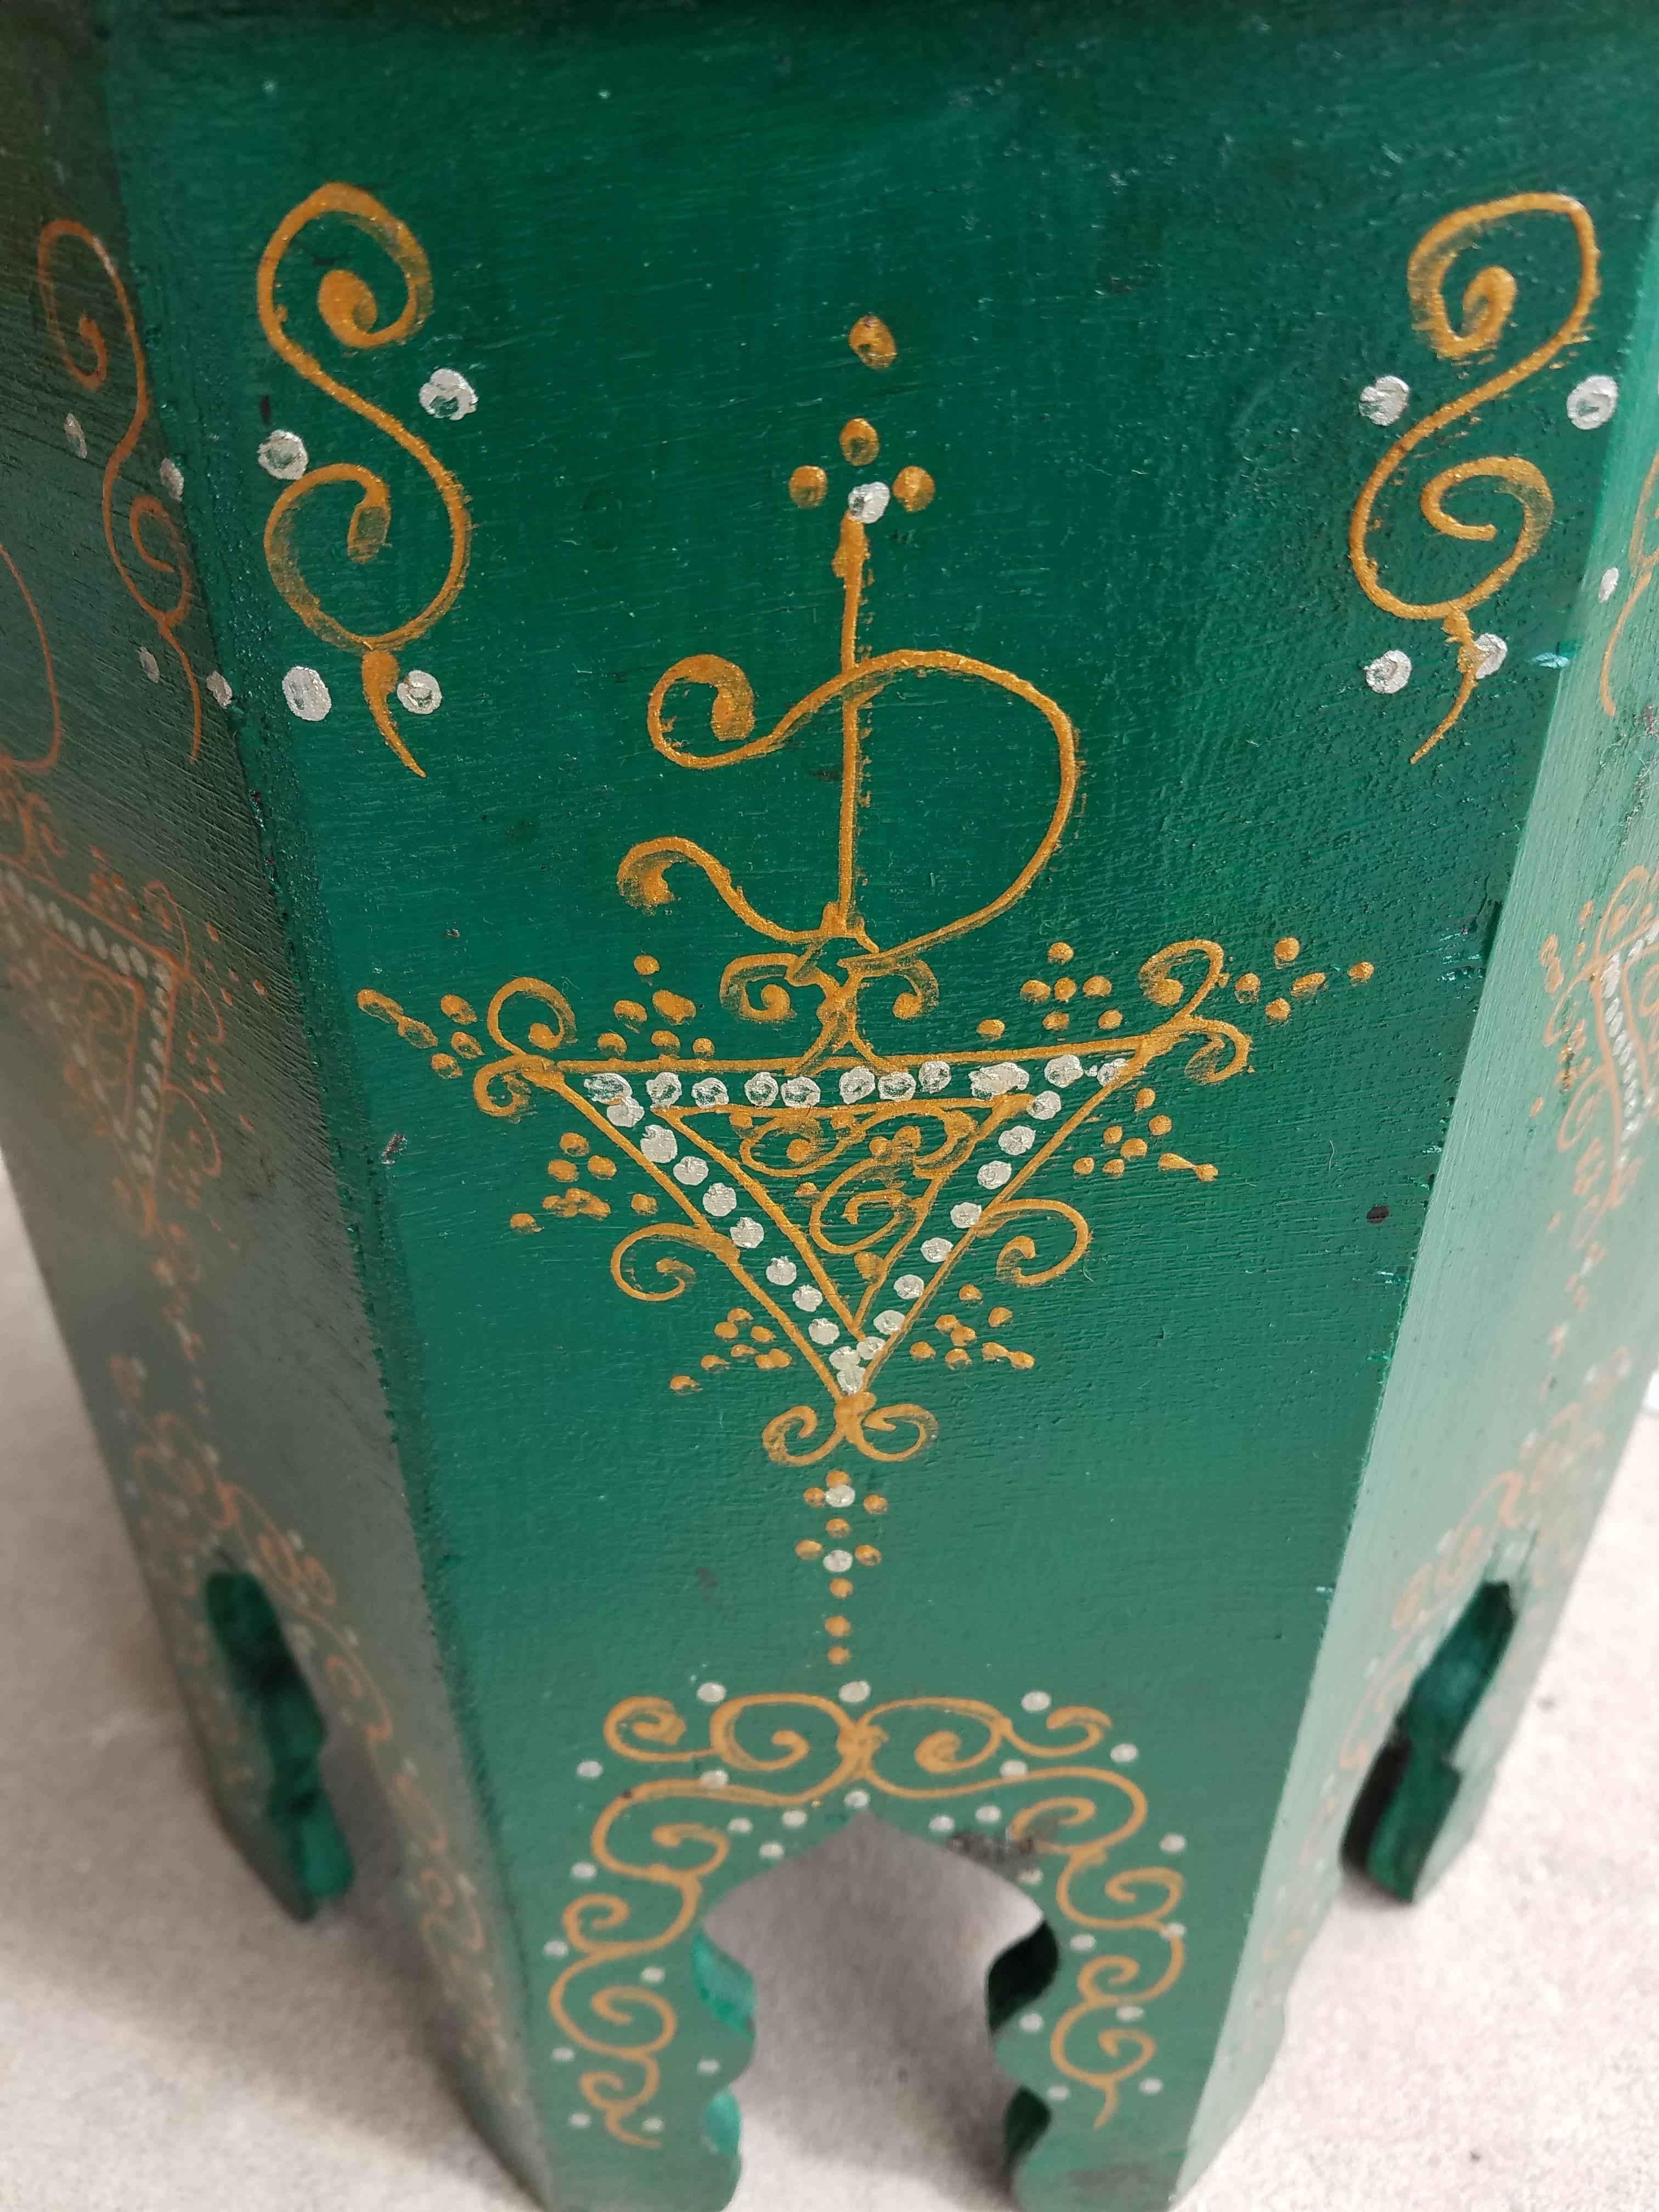 Rare find! 100% hand-painted Moroccan hexagonal shape side table. Green color. Great handcraftsmanship throughout. Beautiful add-on to your decor. This table measures approximately 14